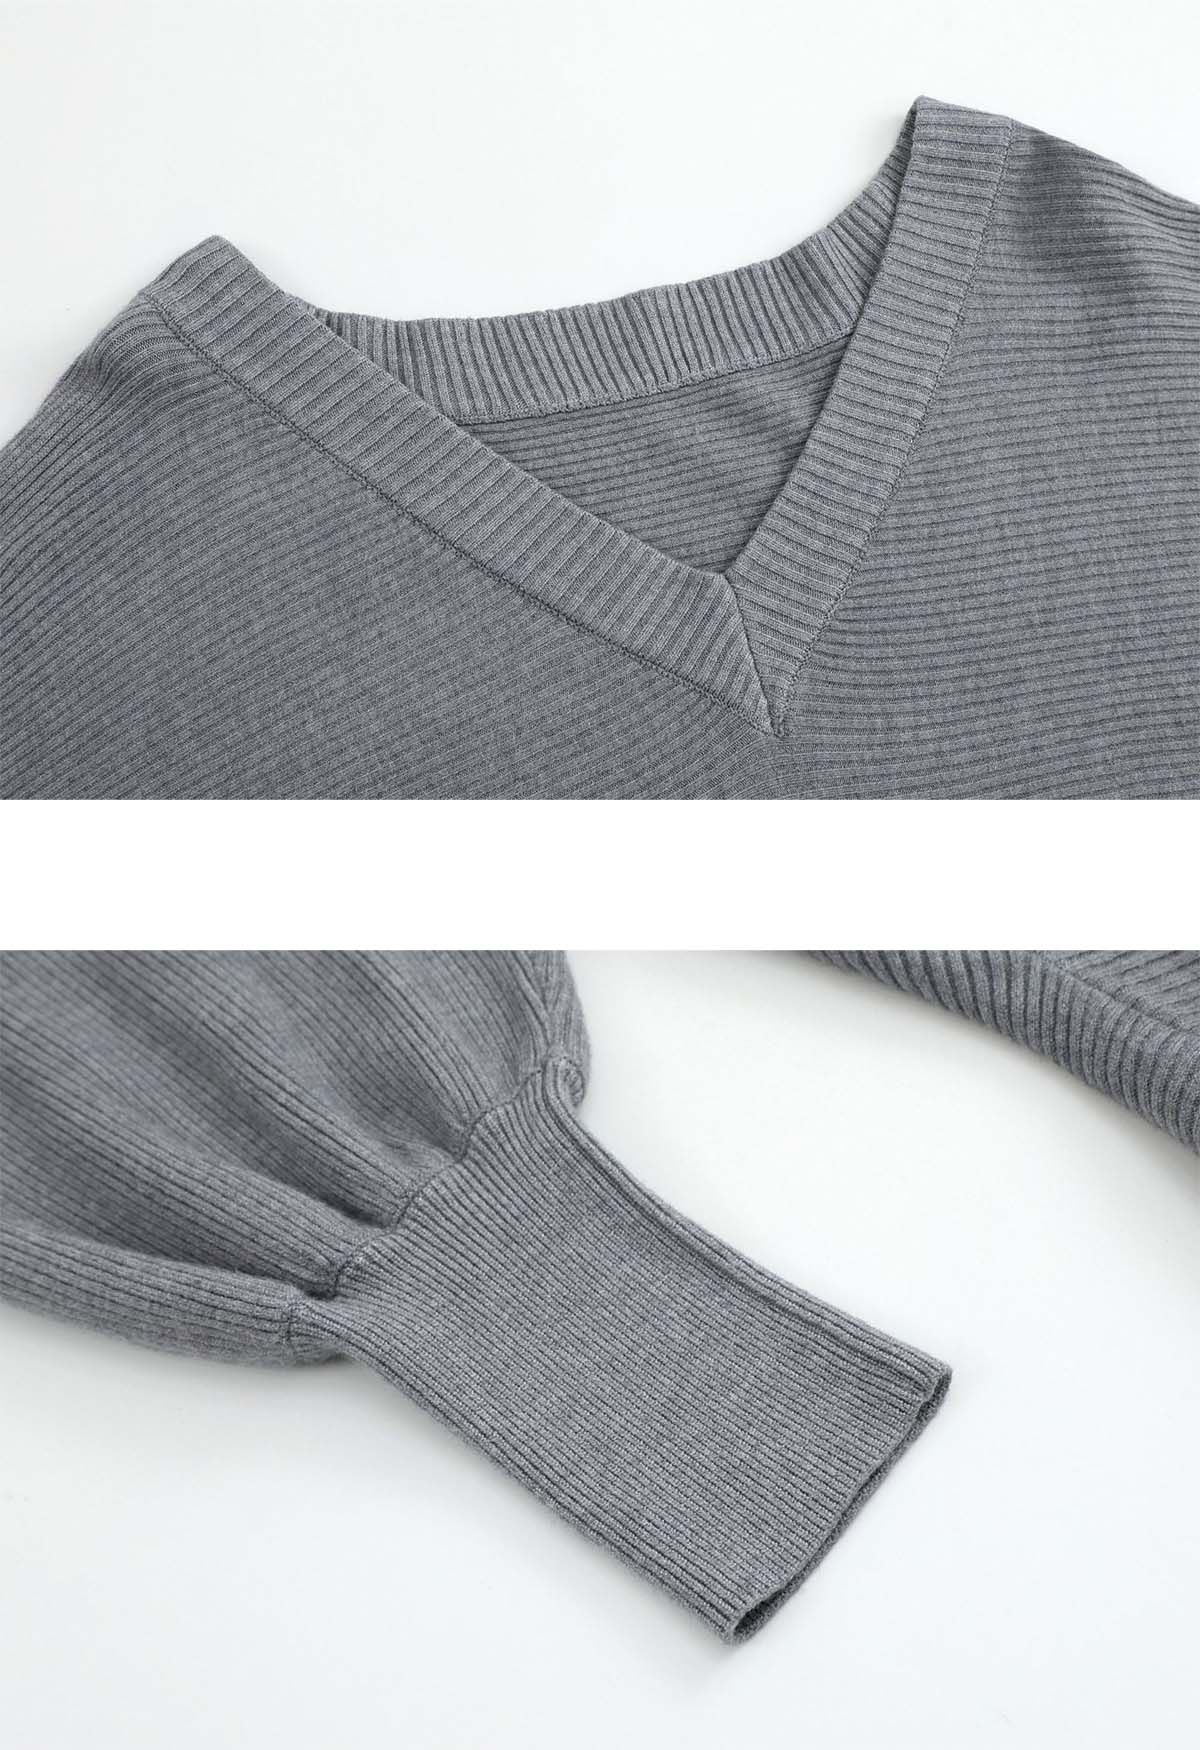 V-Neck Batwing Sleeves Pullover Knit Sweater in Grey - Retro, Indie and ...